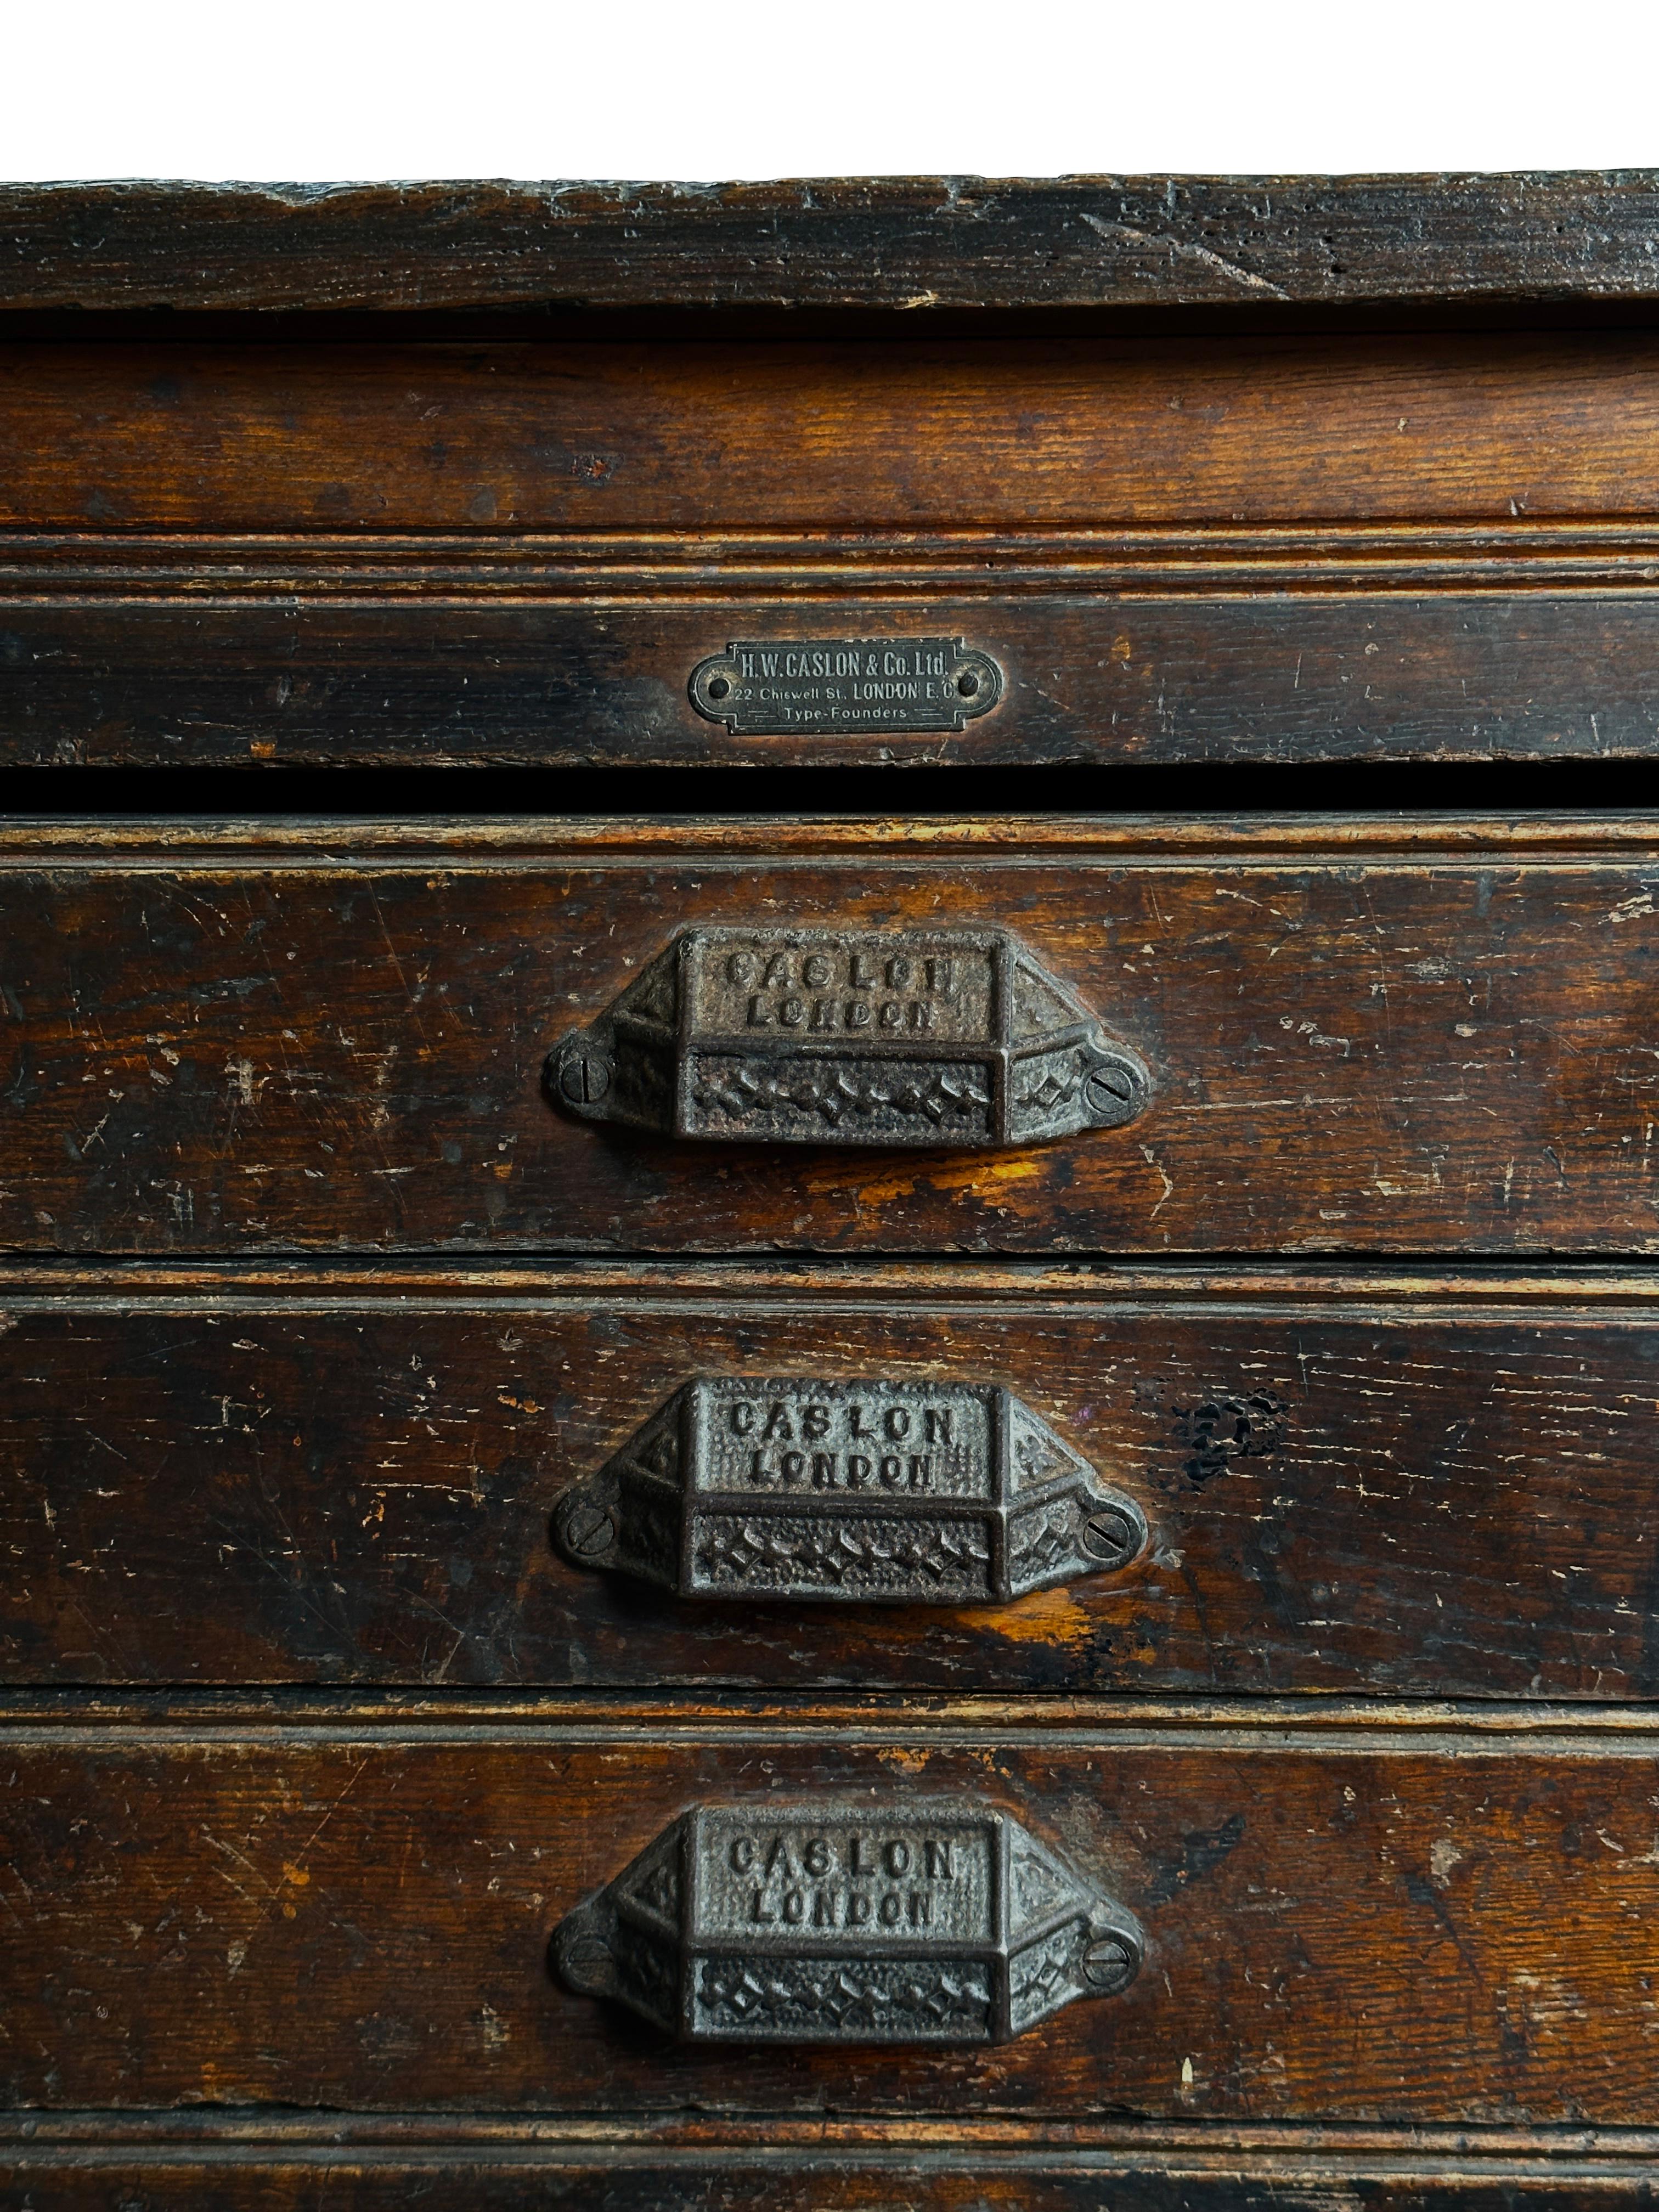 - A wonderful bank of industrial printers drawers by Caslon London, English circa 1920.
- There are 8 well worn graduated drawers in total all showing fine grain interest and rich amber hues.
- The drawers retain their original makers label marked